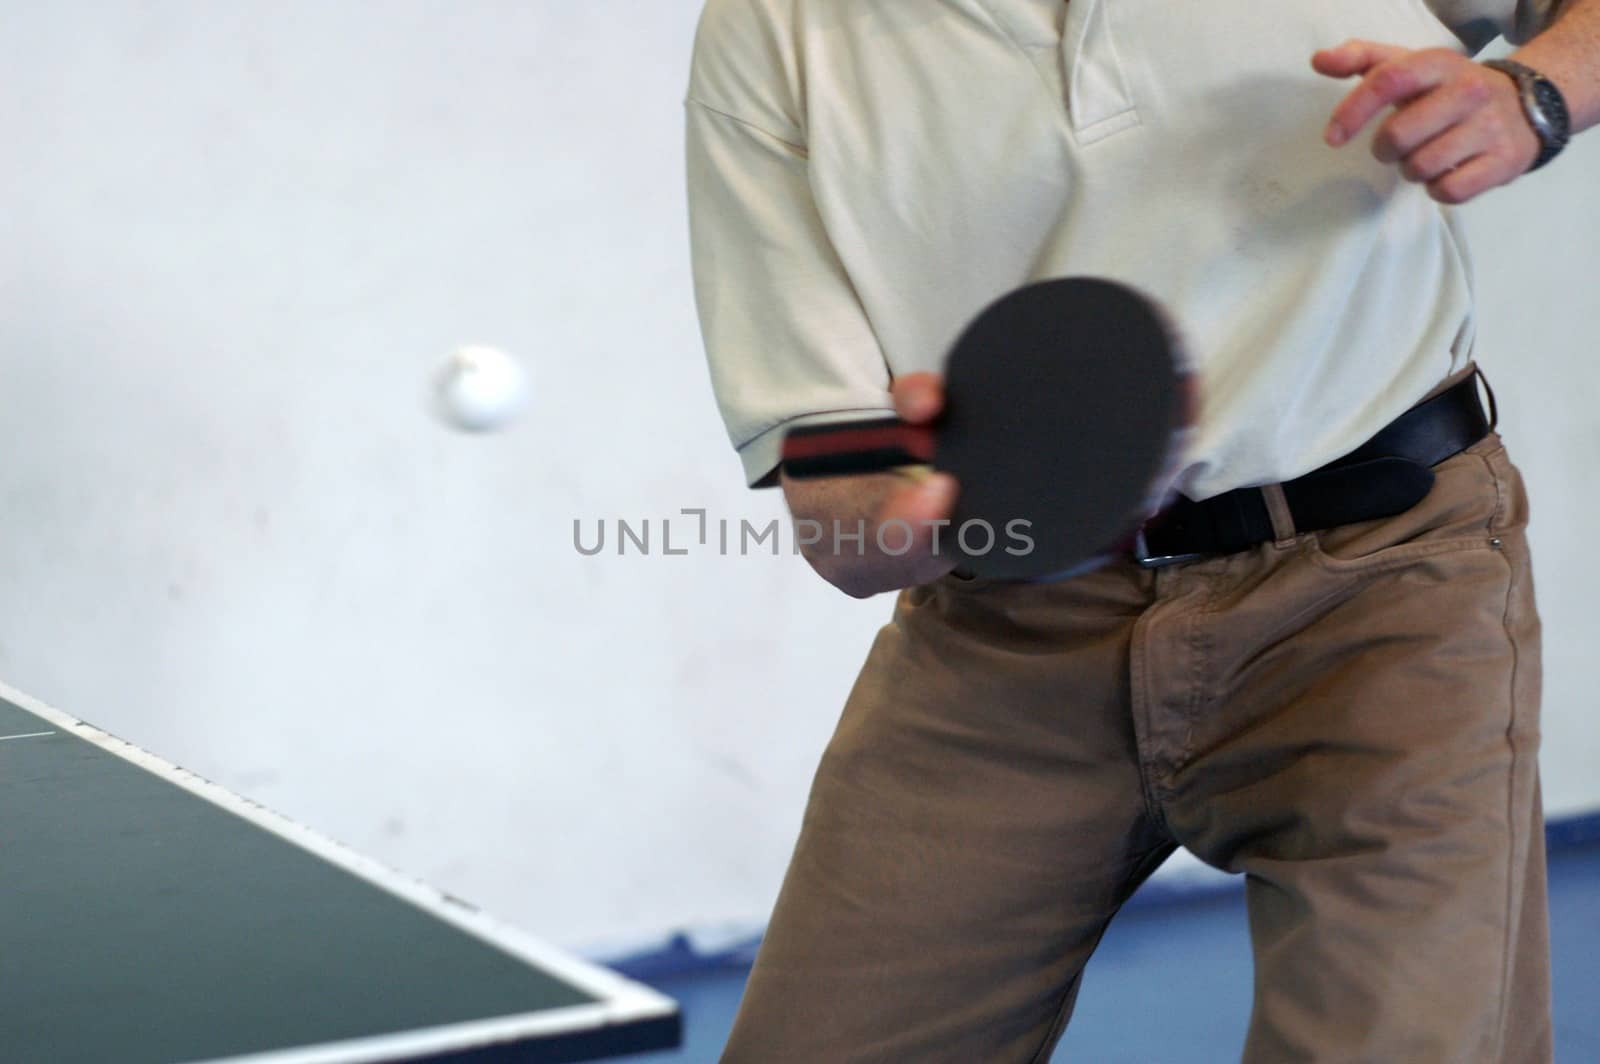 office man playing ping pong at a break time